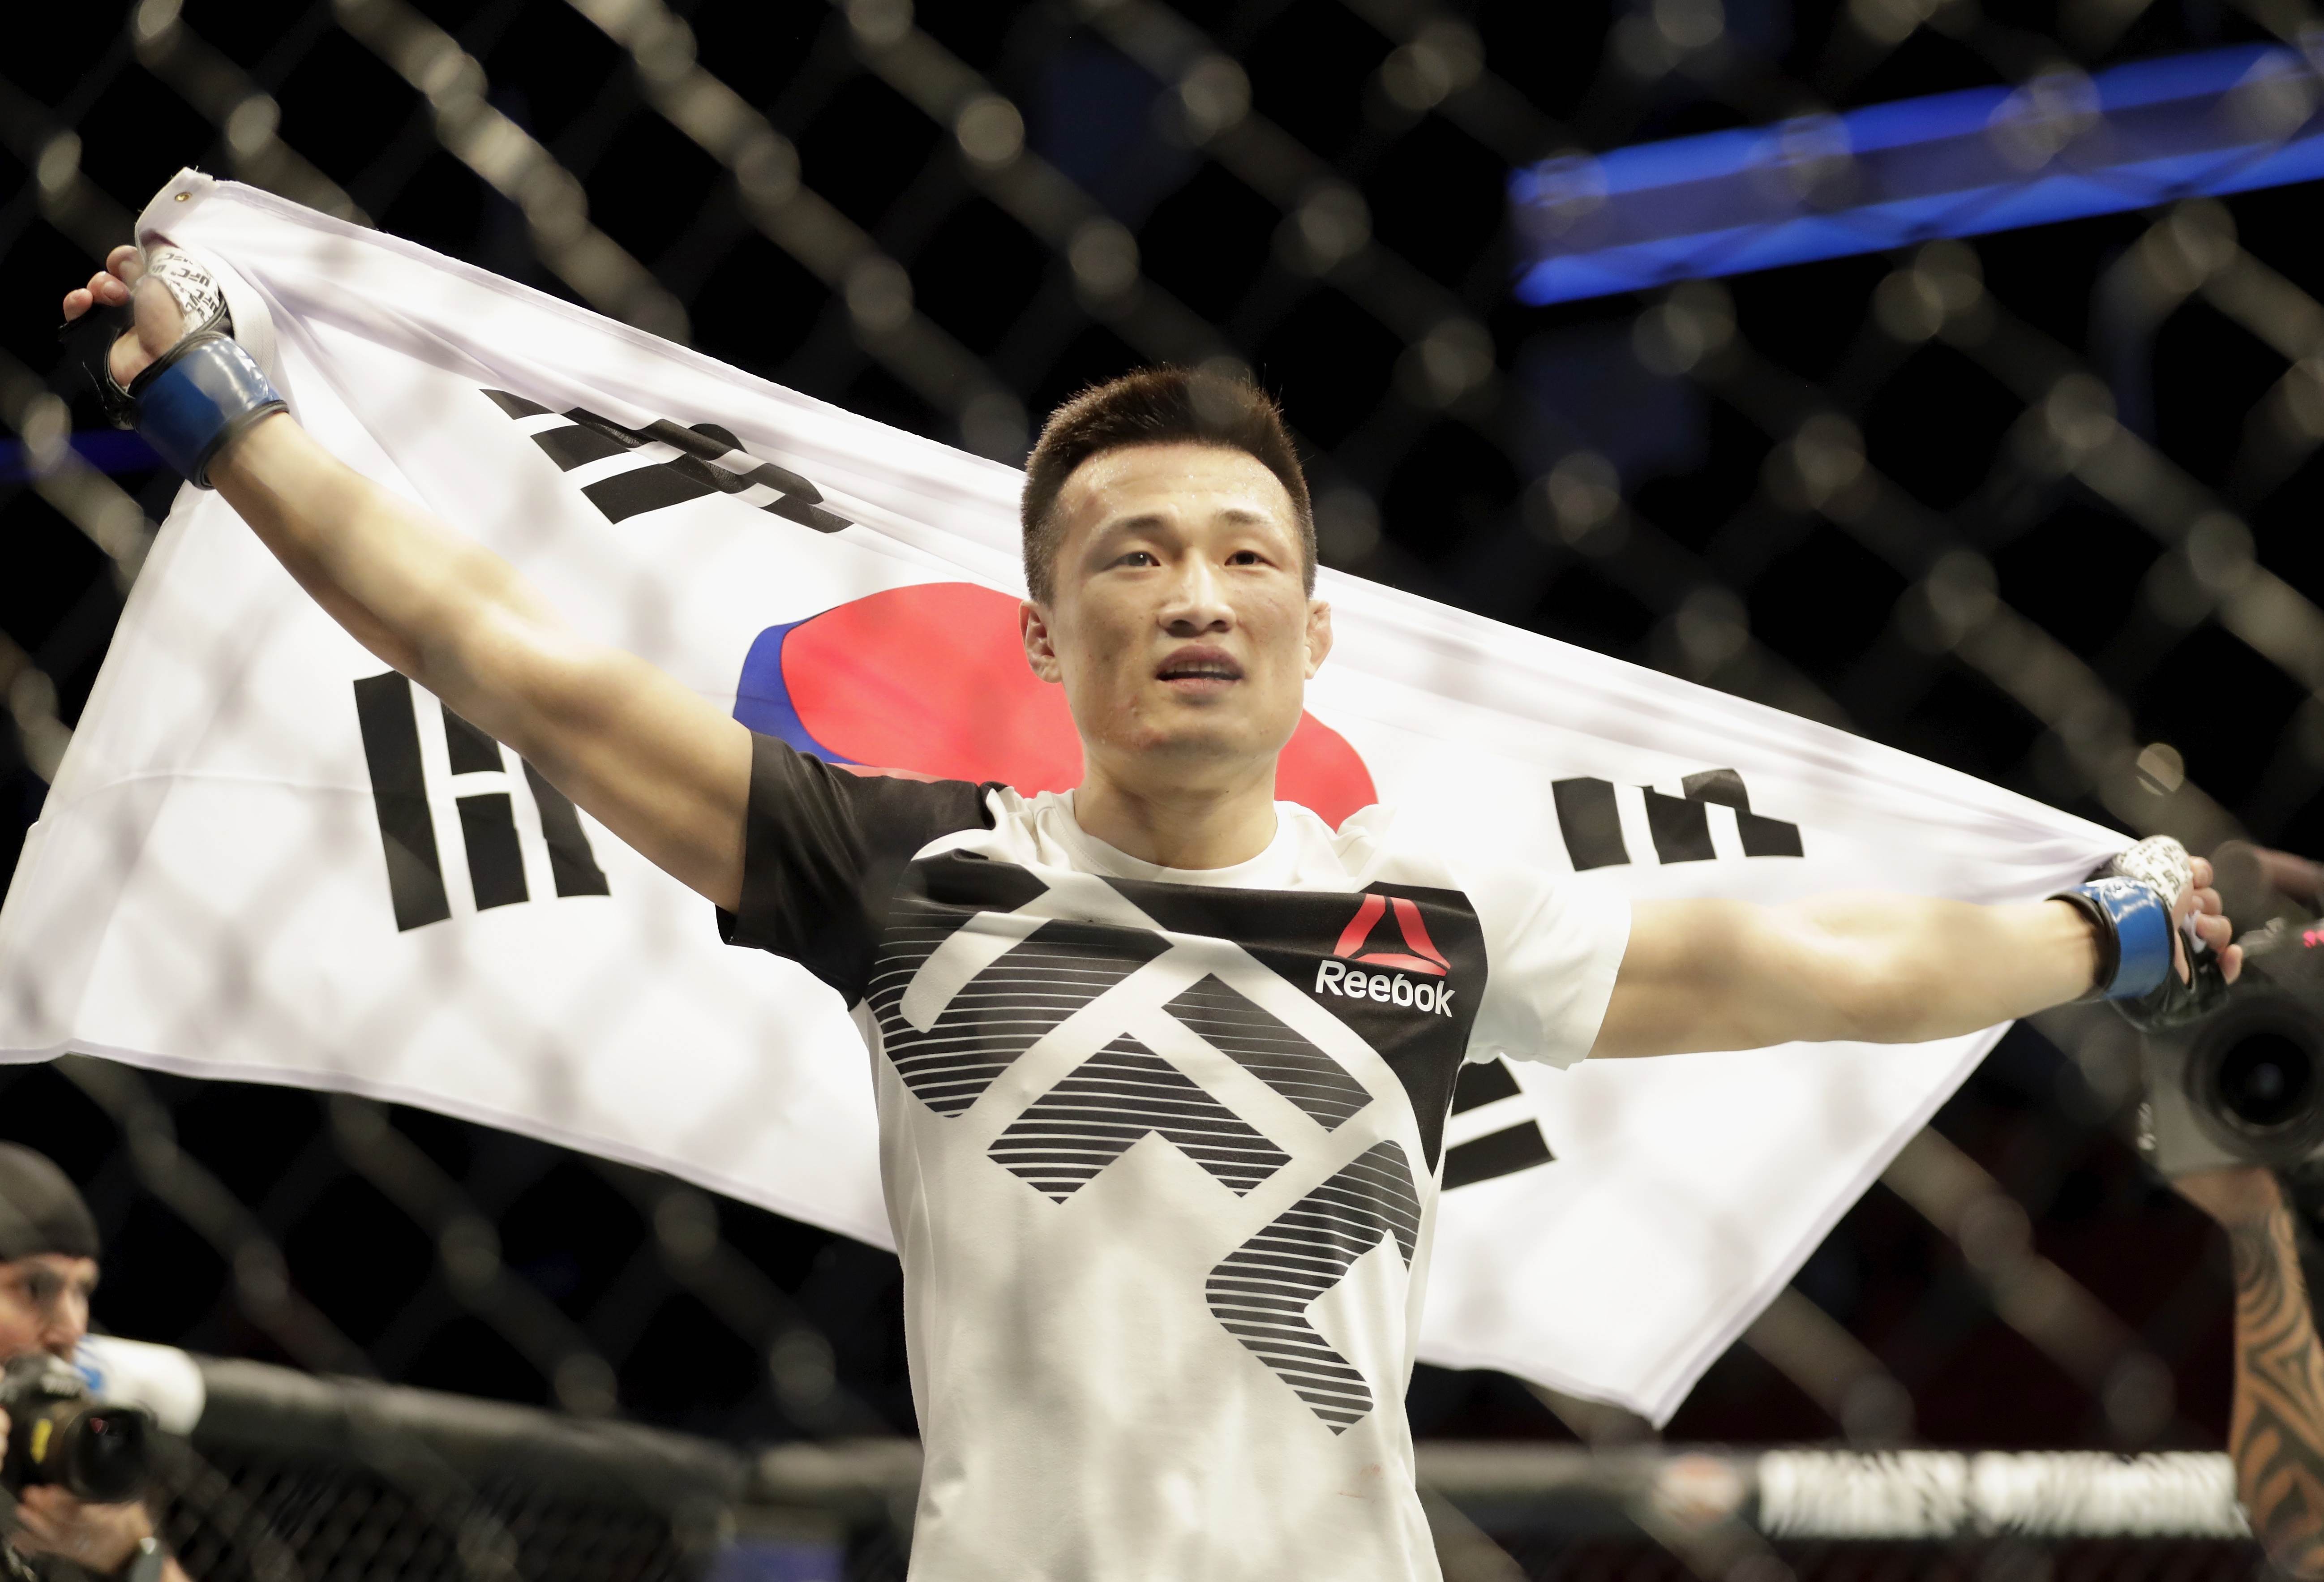 Jung Chan-sung celebrates with his native flag after defeating Dennis Bermudez in 2017. Photo: AFP